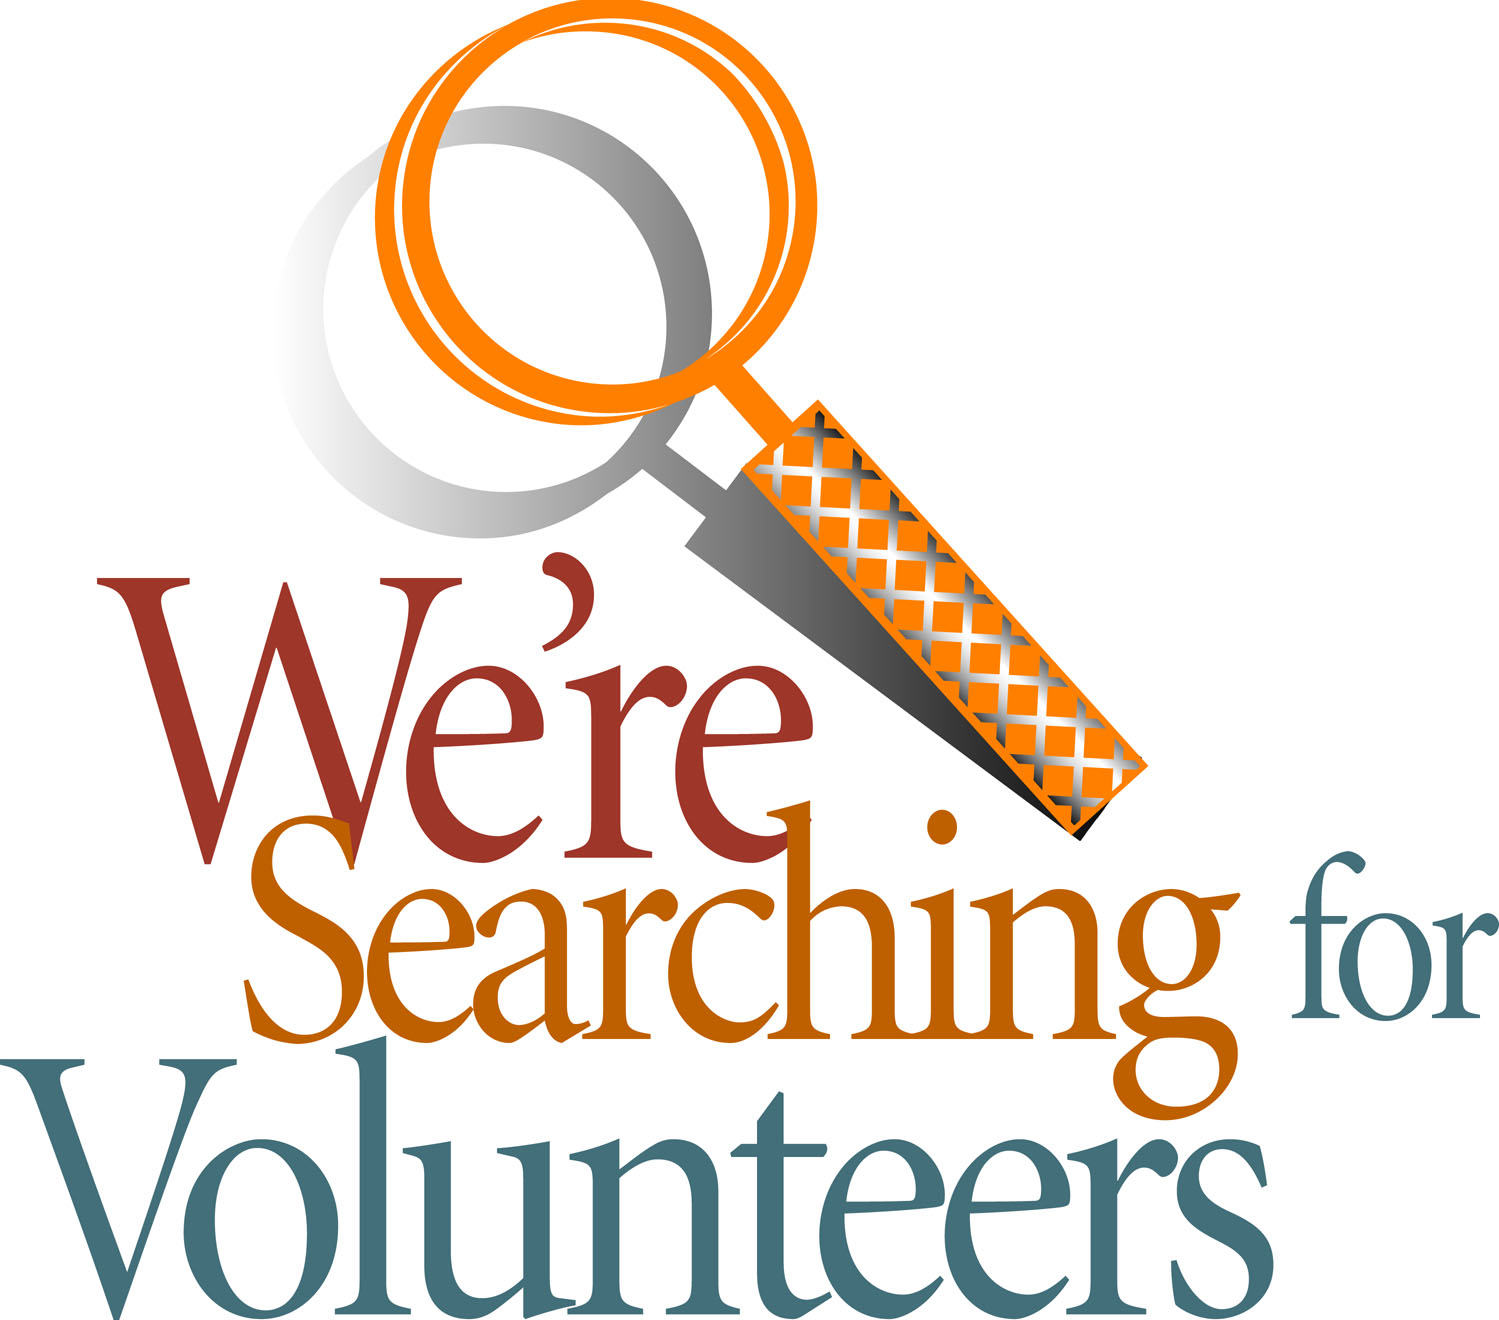 clipart images of volunteers - photo #10